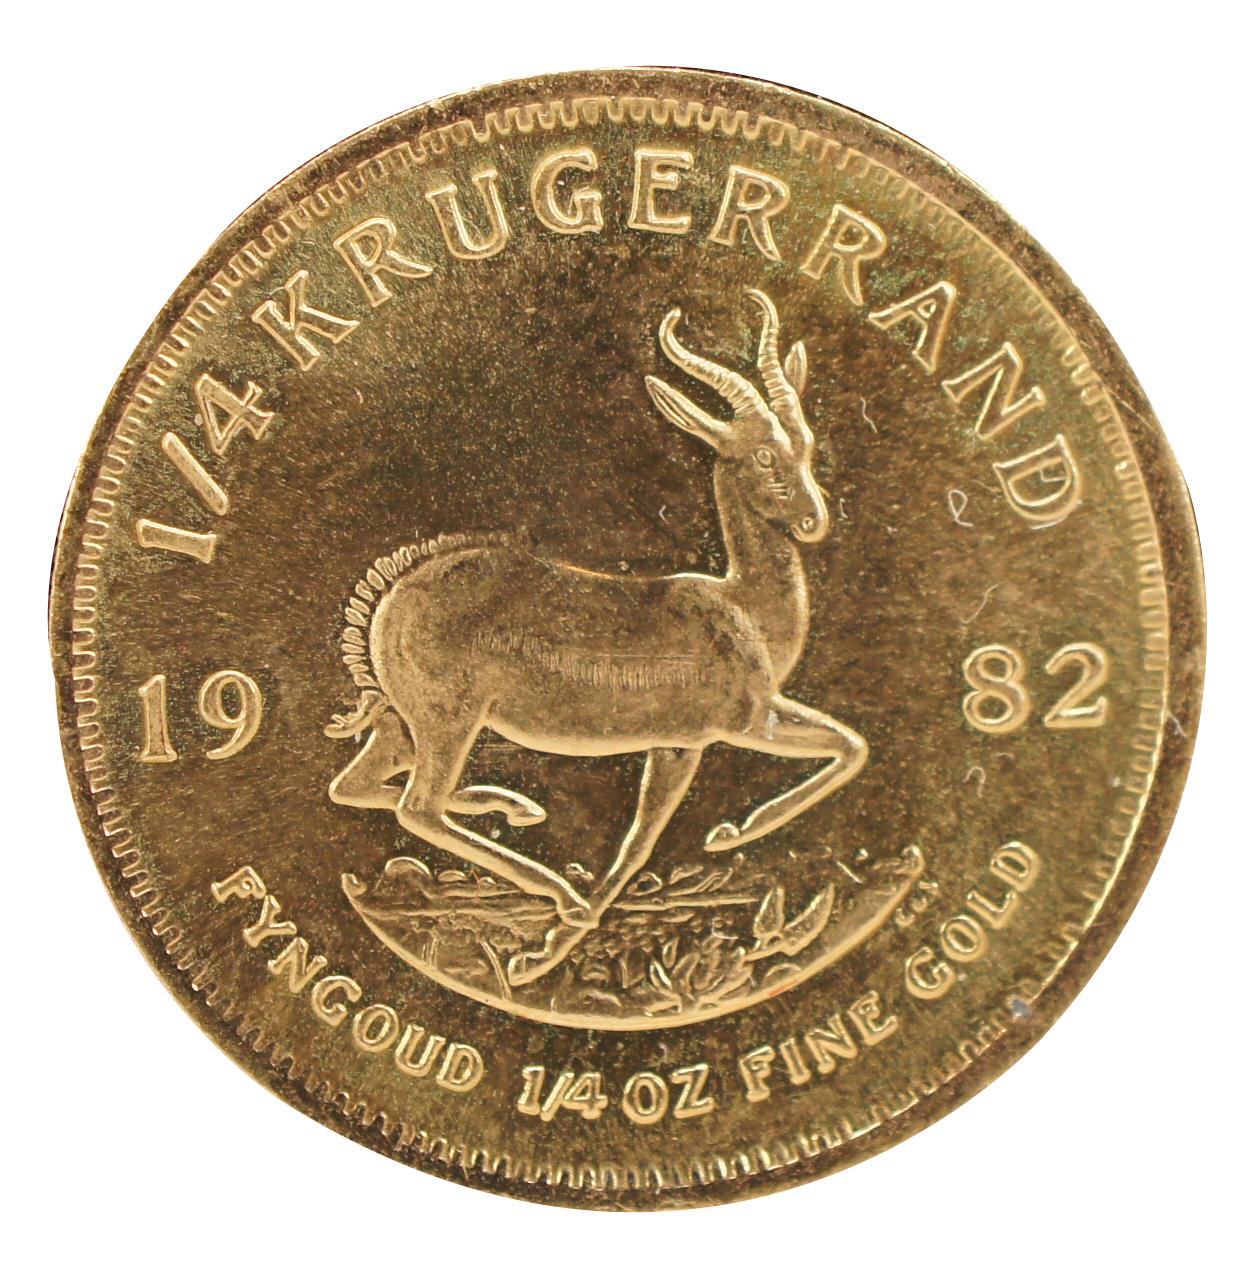 Vintage 1982 South African ¼ oz fine gold coin. The obverse shows a portrait of Paul Kruger, president of the old South African Republic; the reverse shows a Springbok Antelope Stag, one of South Africa's national symbols.

8.47 g.